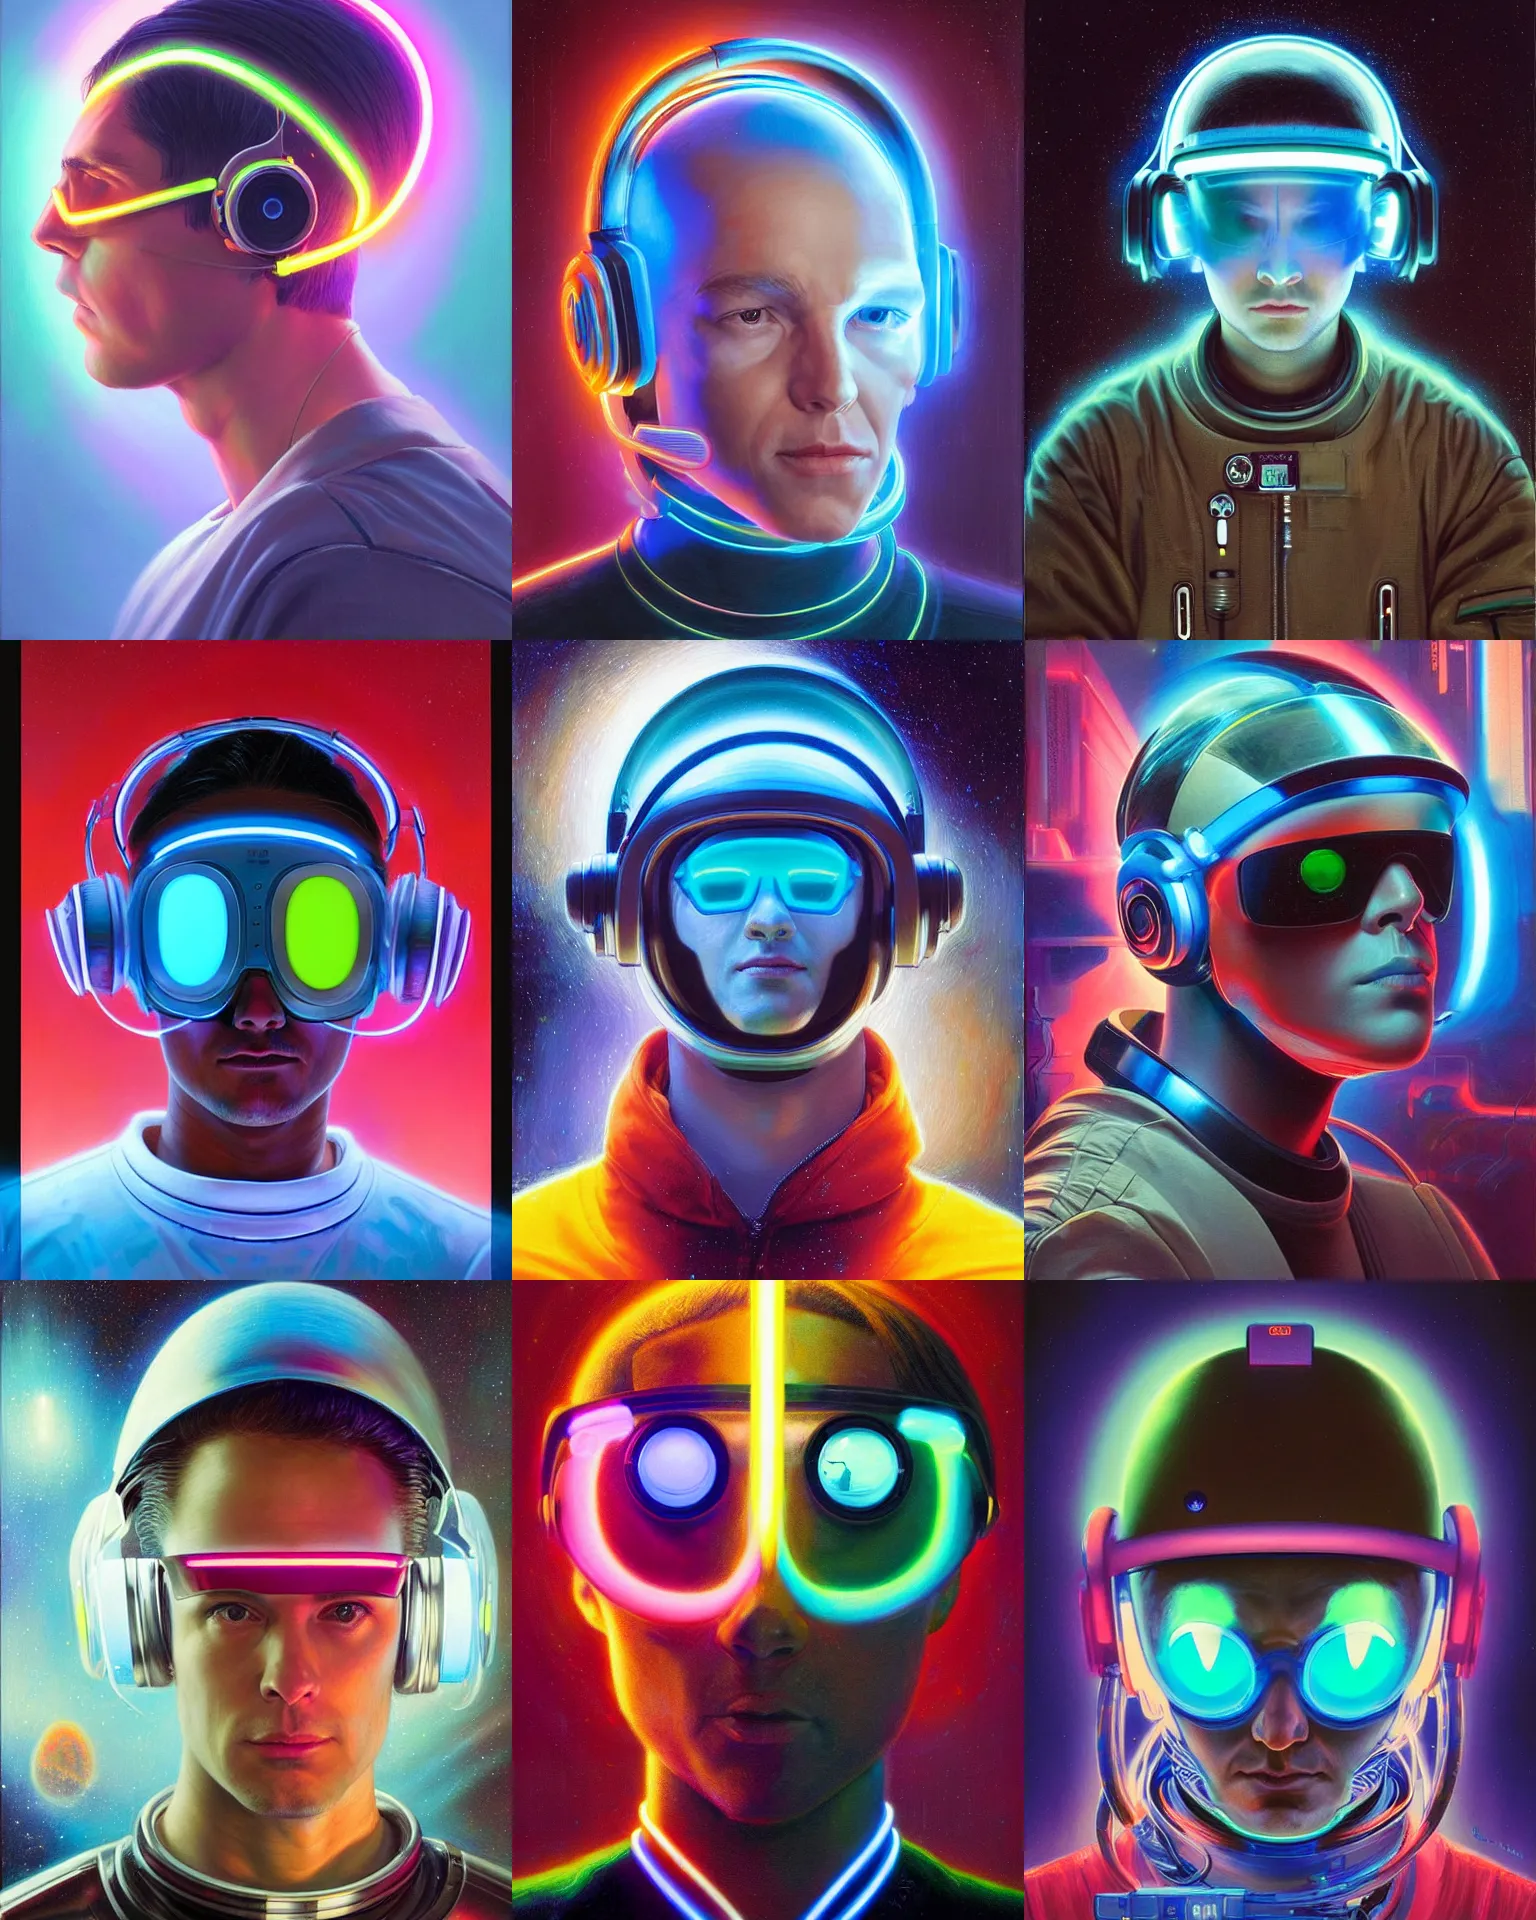 Prompt: future coder, glowing visor over eyes and sleek neon headphones headshot desaturated profile portrait painting by donato giancola, dean cornwall, rhads, tom whalen, alex grey astronaut cyberpunk electric fashion photography